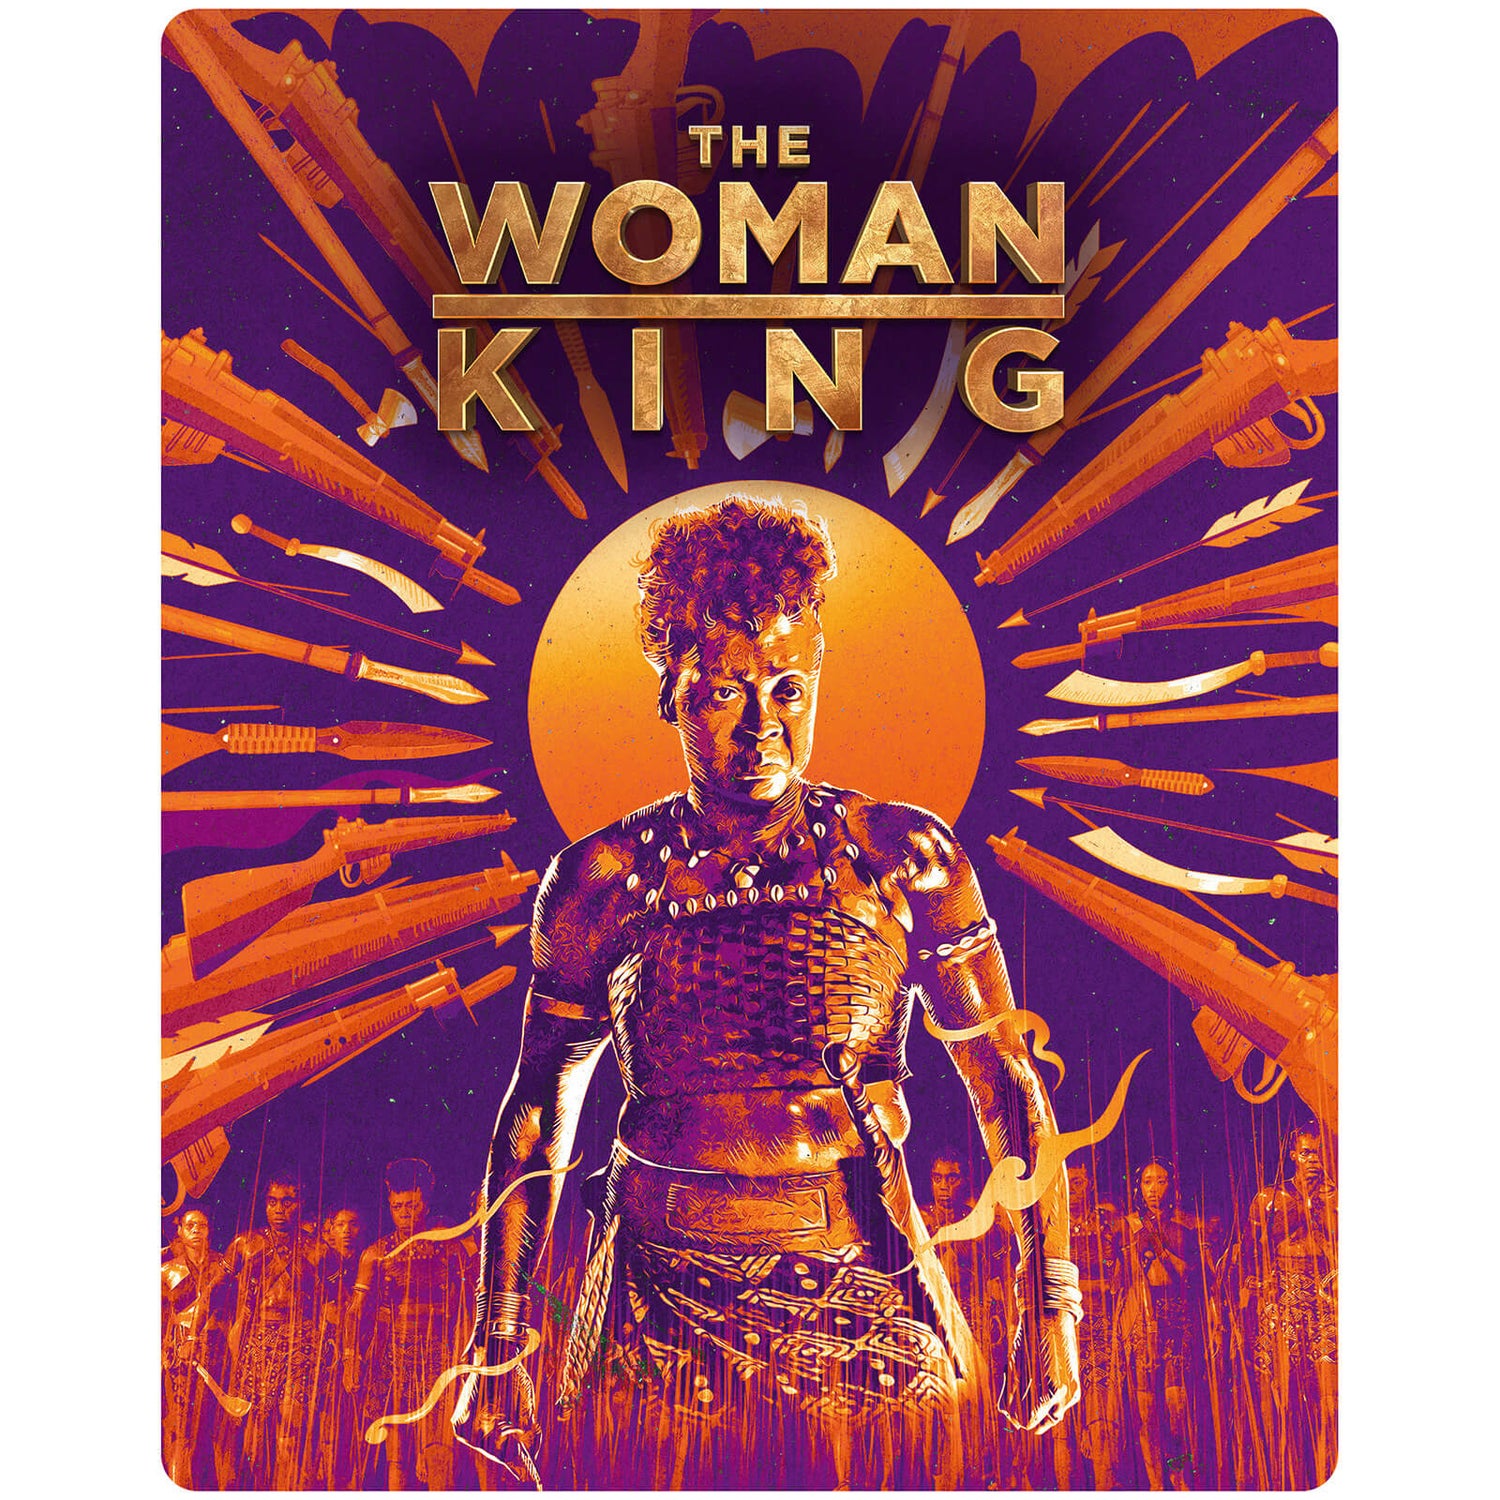 The Woman King Limited Edition 4K Ultra HD Steelbook (includes Blu-ray)